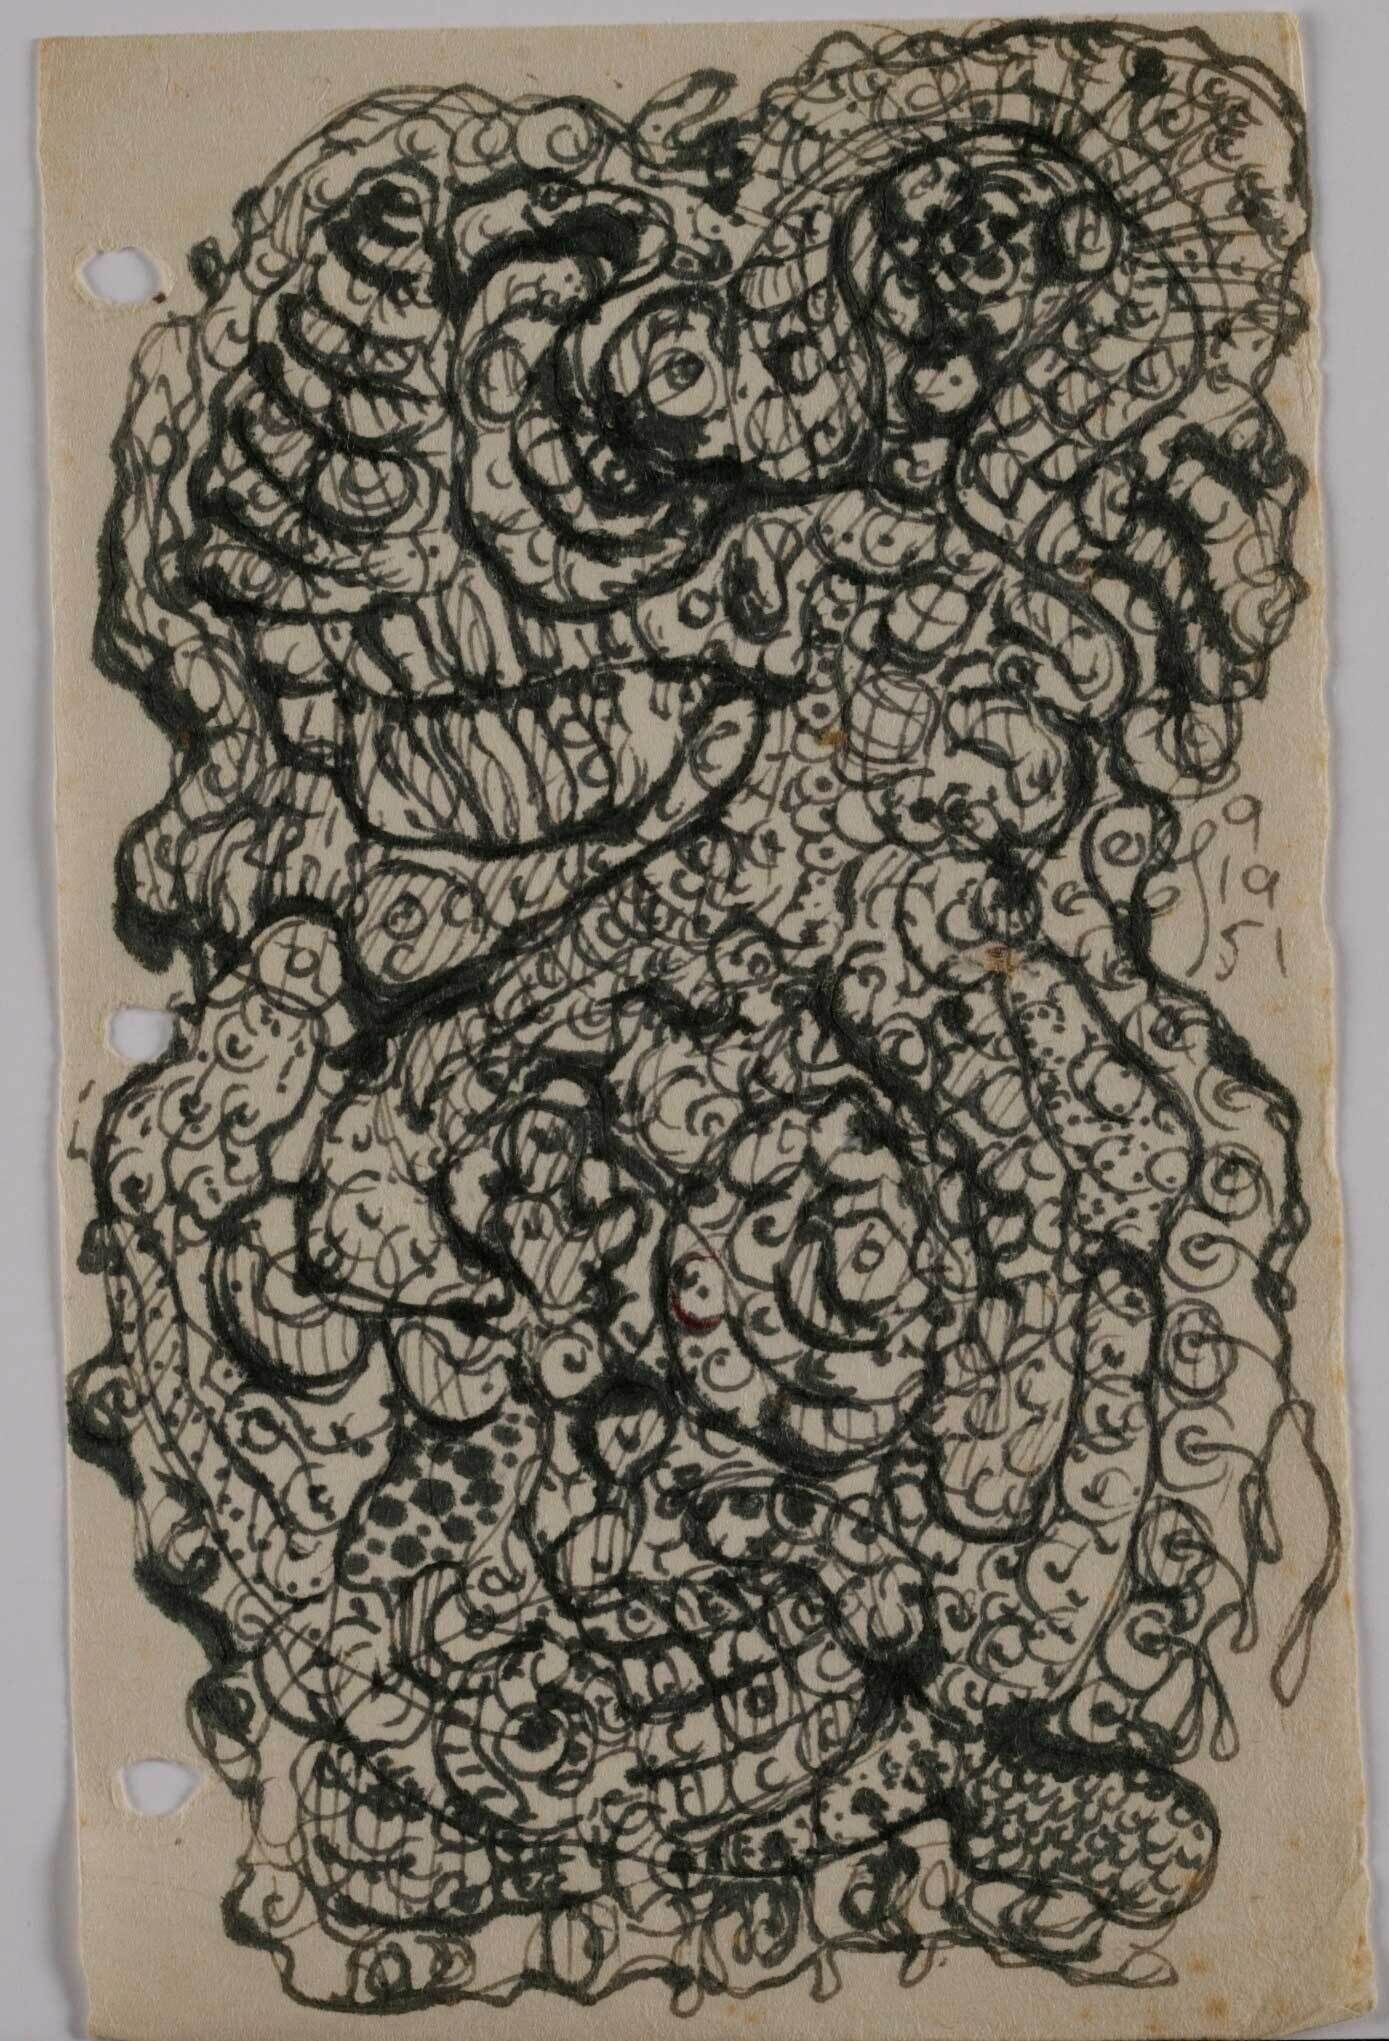 An abstract drawing consisting of black swirls, spirals, and dots overlapping each other. The background paper is an off-white color with a three hole punch on the left edge.